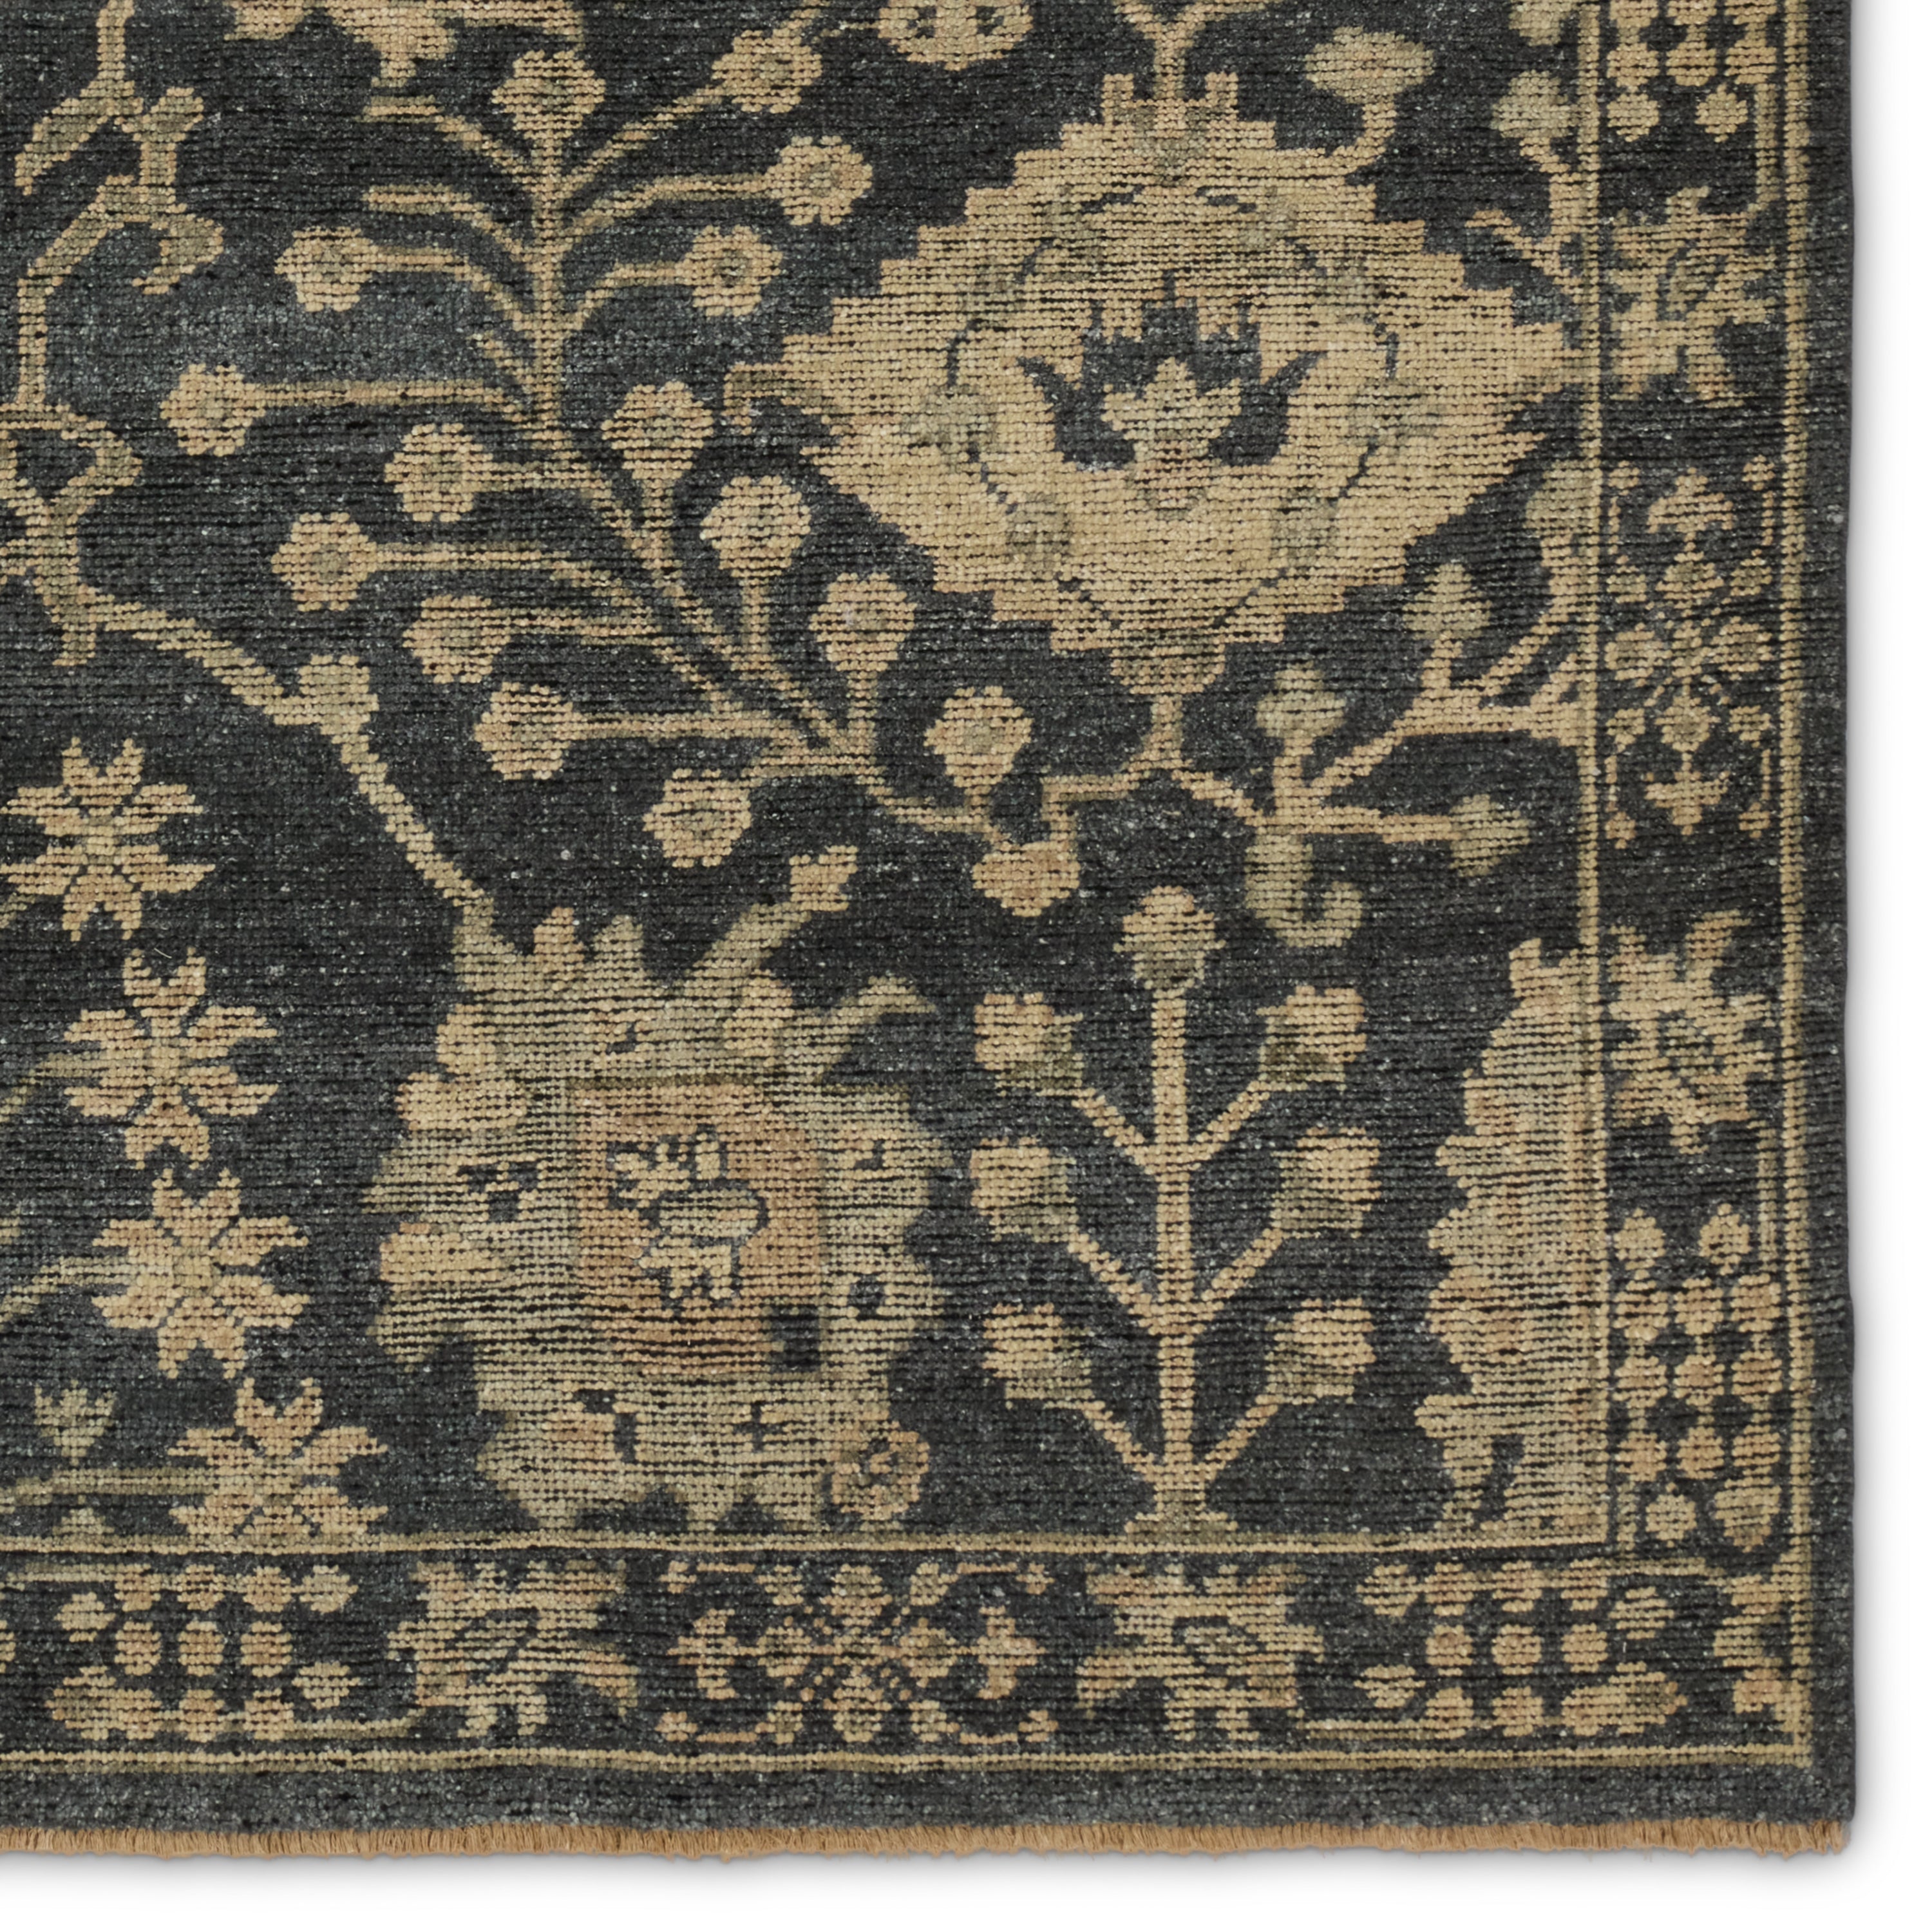 The Rhapsody collection features heirloom-quality designs of stunningly abrashed Old World patterns. The Maeli area rug boasts a beautifully washed Oushak motif with a decorative border. The dark gray tones are accented with khaki, cream, green, and beige hues for added depth and intrigue. This durable wool handknot anchors living spaces with a fresh take on vintage style. Amethyst Home provides interior design, new construction, custom furniture, and area rugs in the Scottsdale metro area.